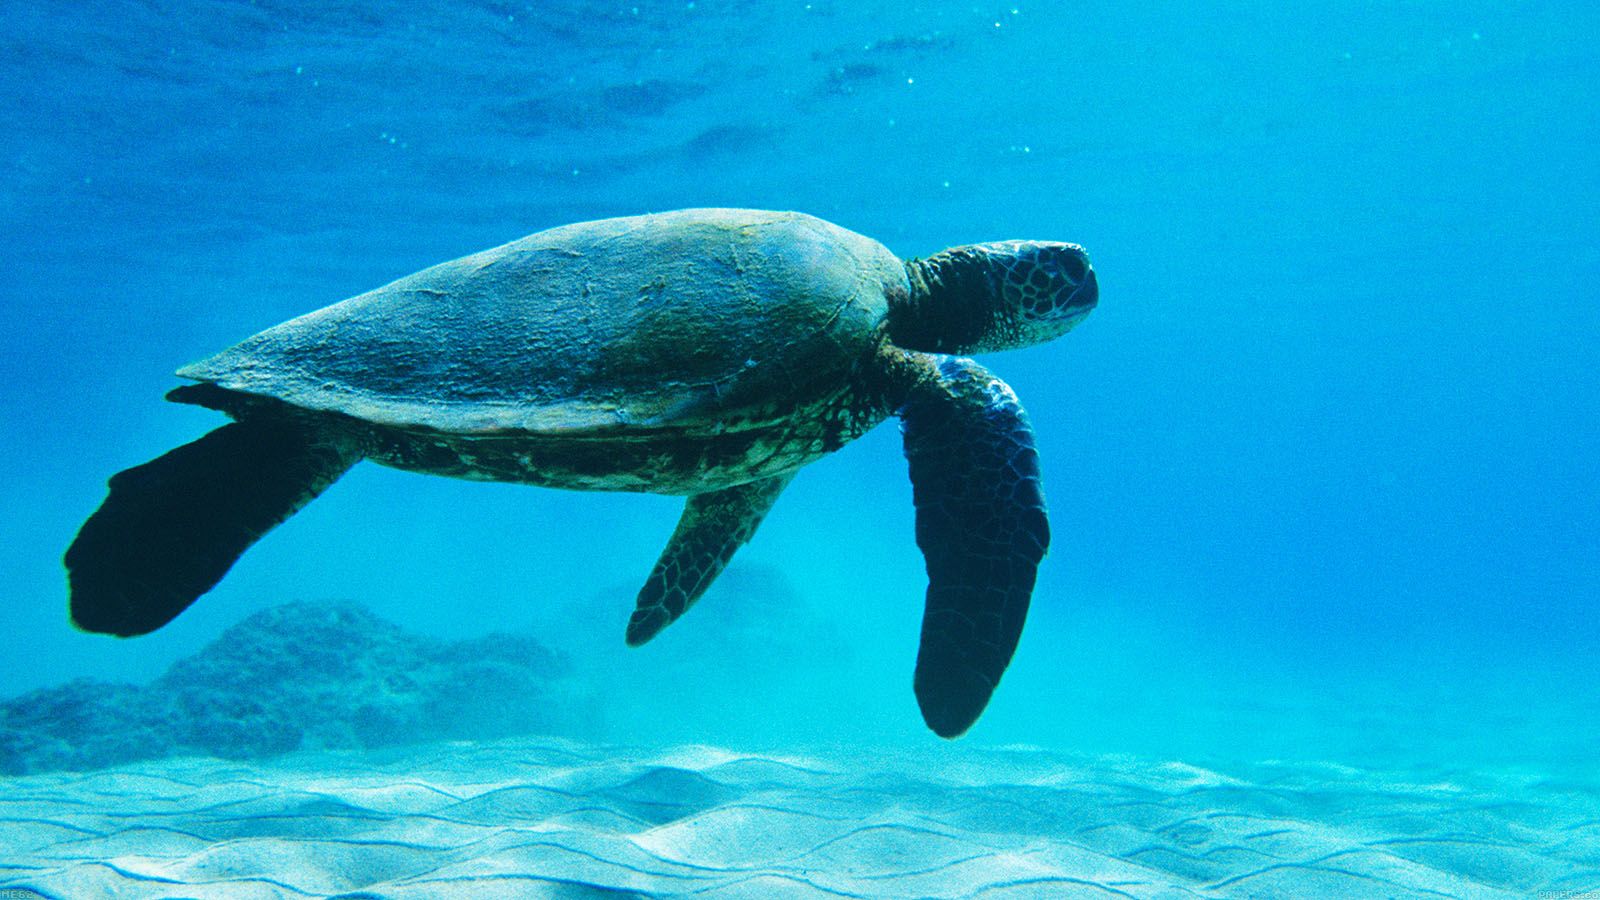 A turtle swimming in the ocean with its flippers - Turtle